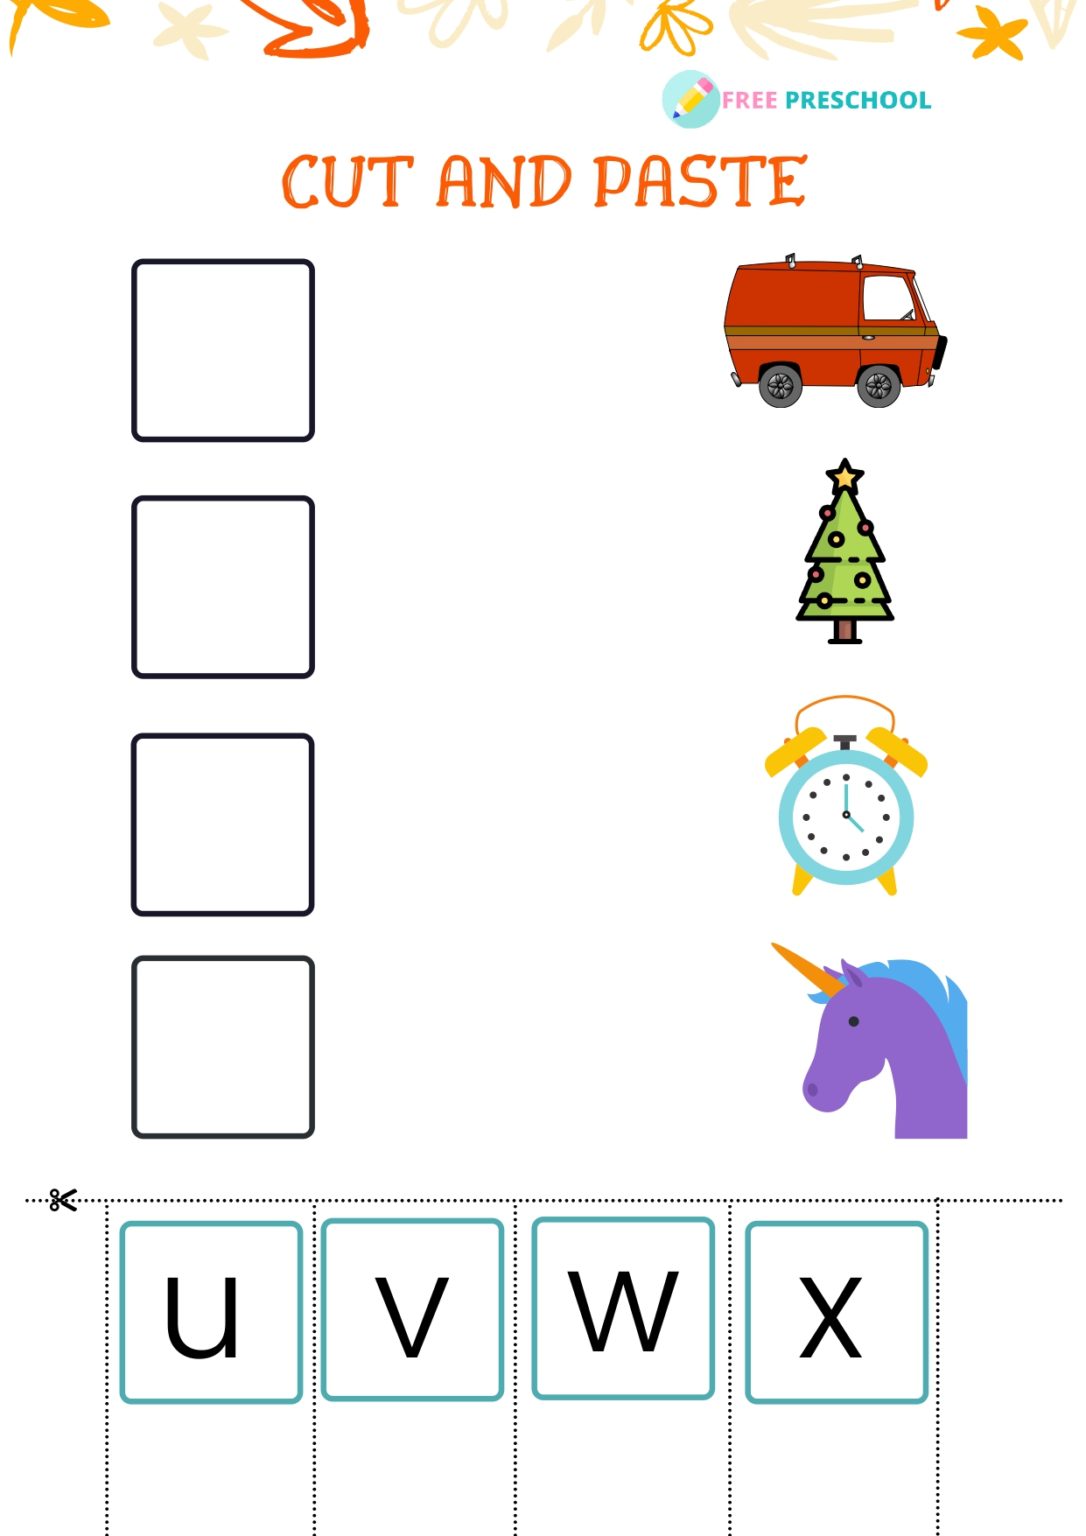 number-cut-and-paste-worksheets-for-preschool-free-preschool-santa-number-cut-match-worksheets